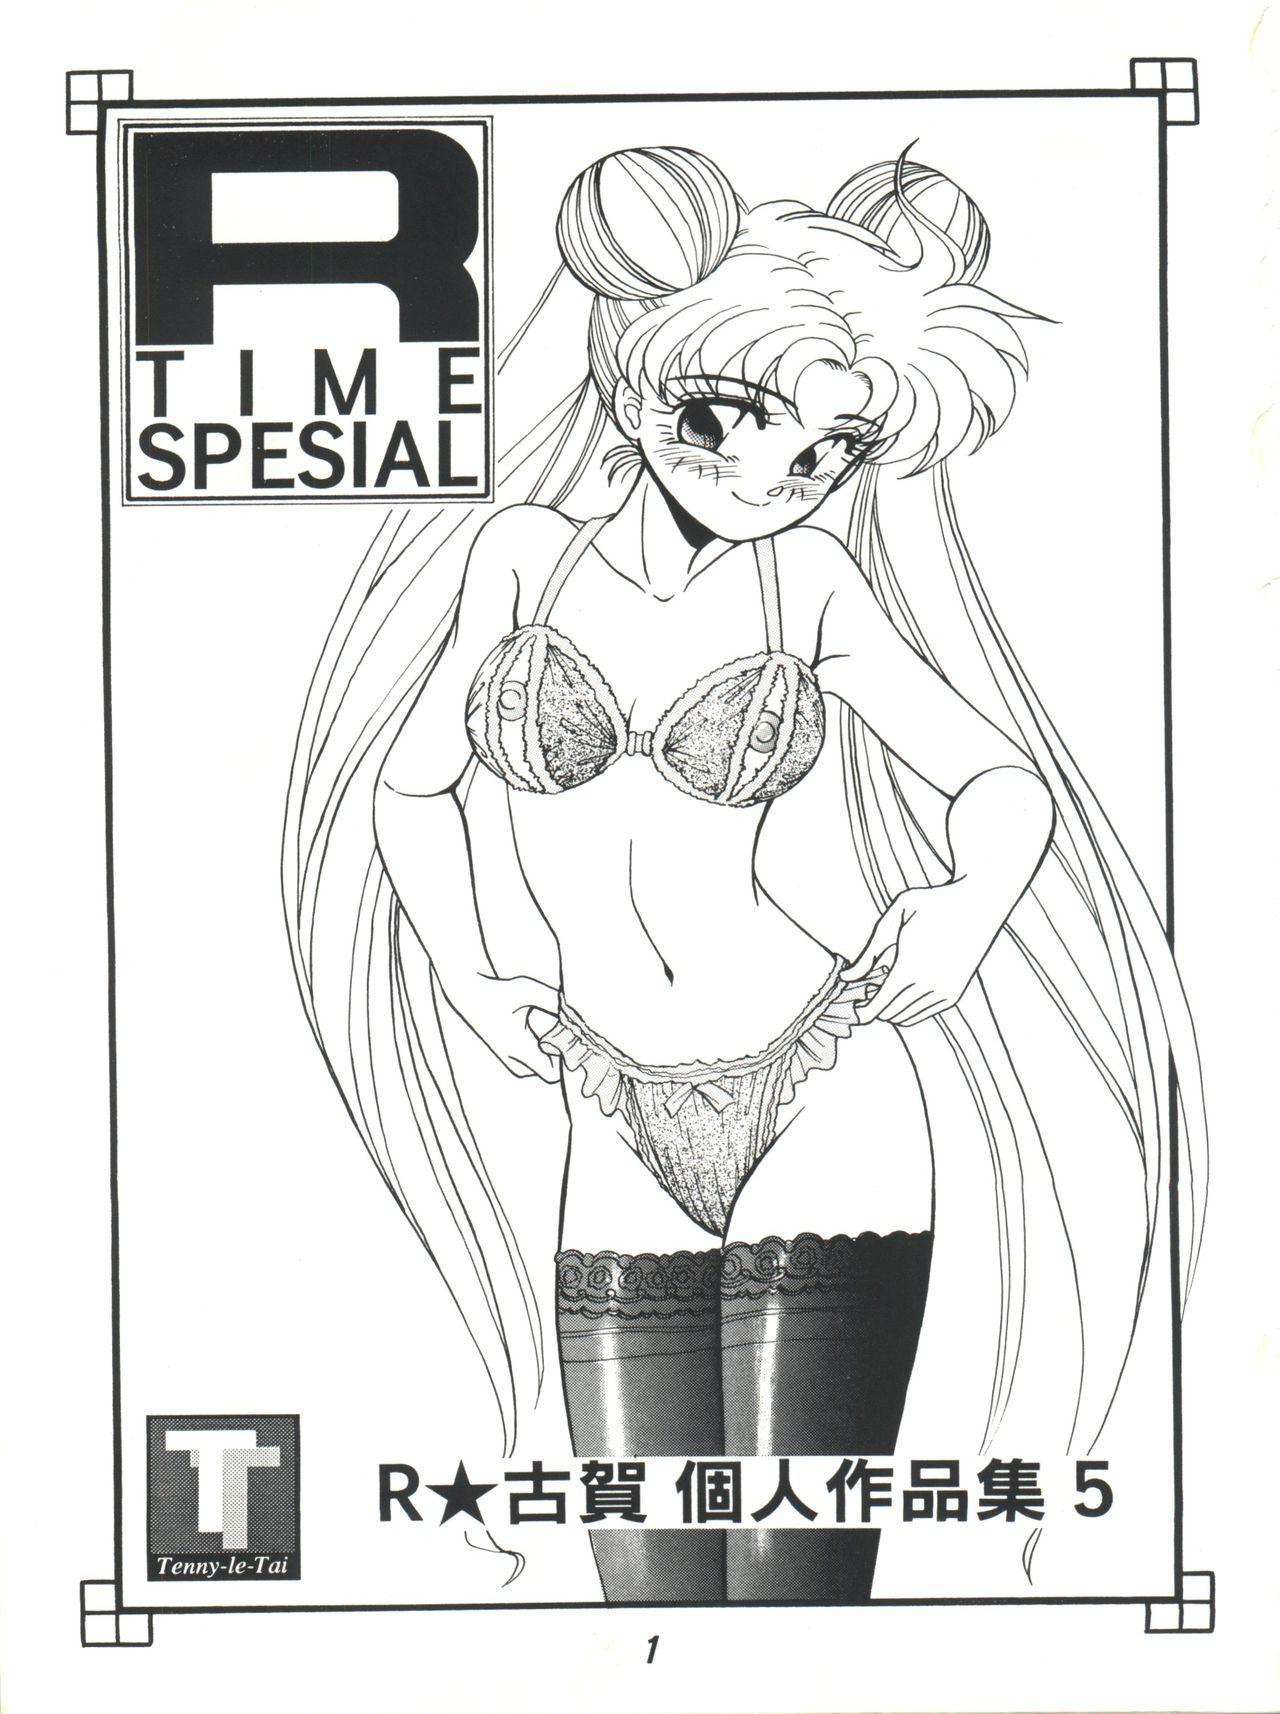 Ftvgirls R Time Special - Sailor moon Ranma 12 3x3 eyes Obi wo gyuttone Tied - Page 3